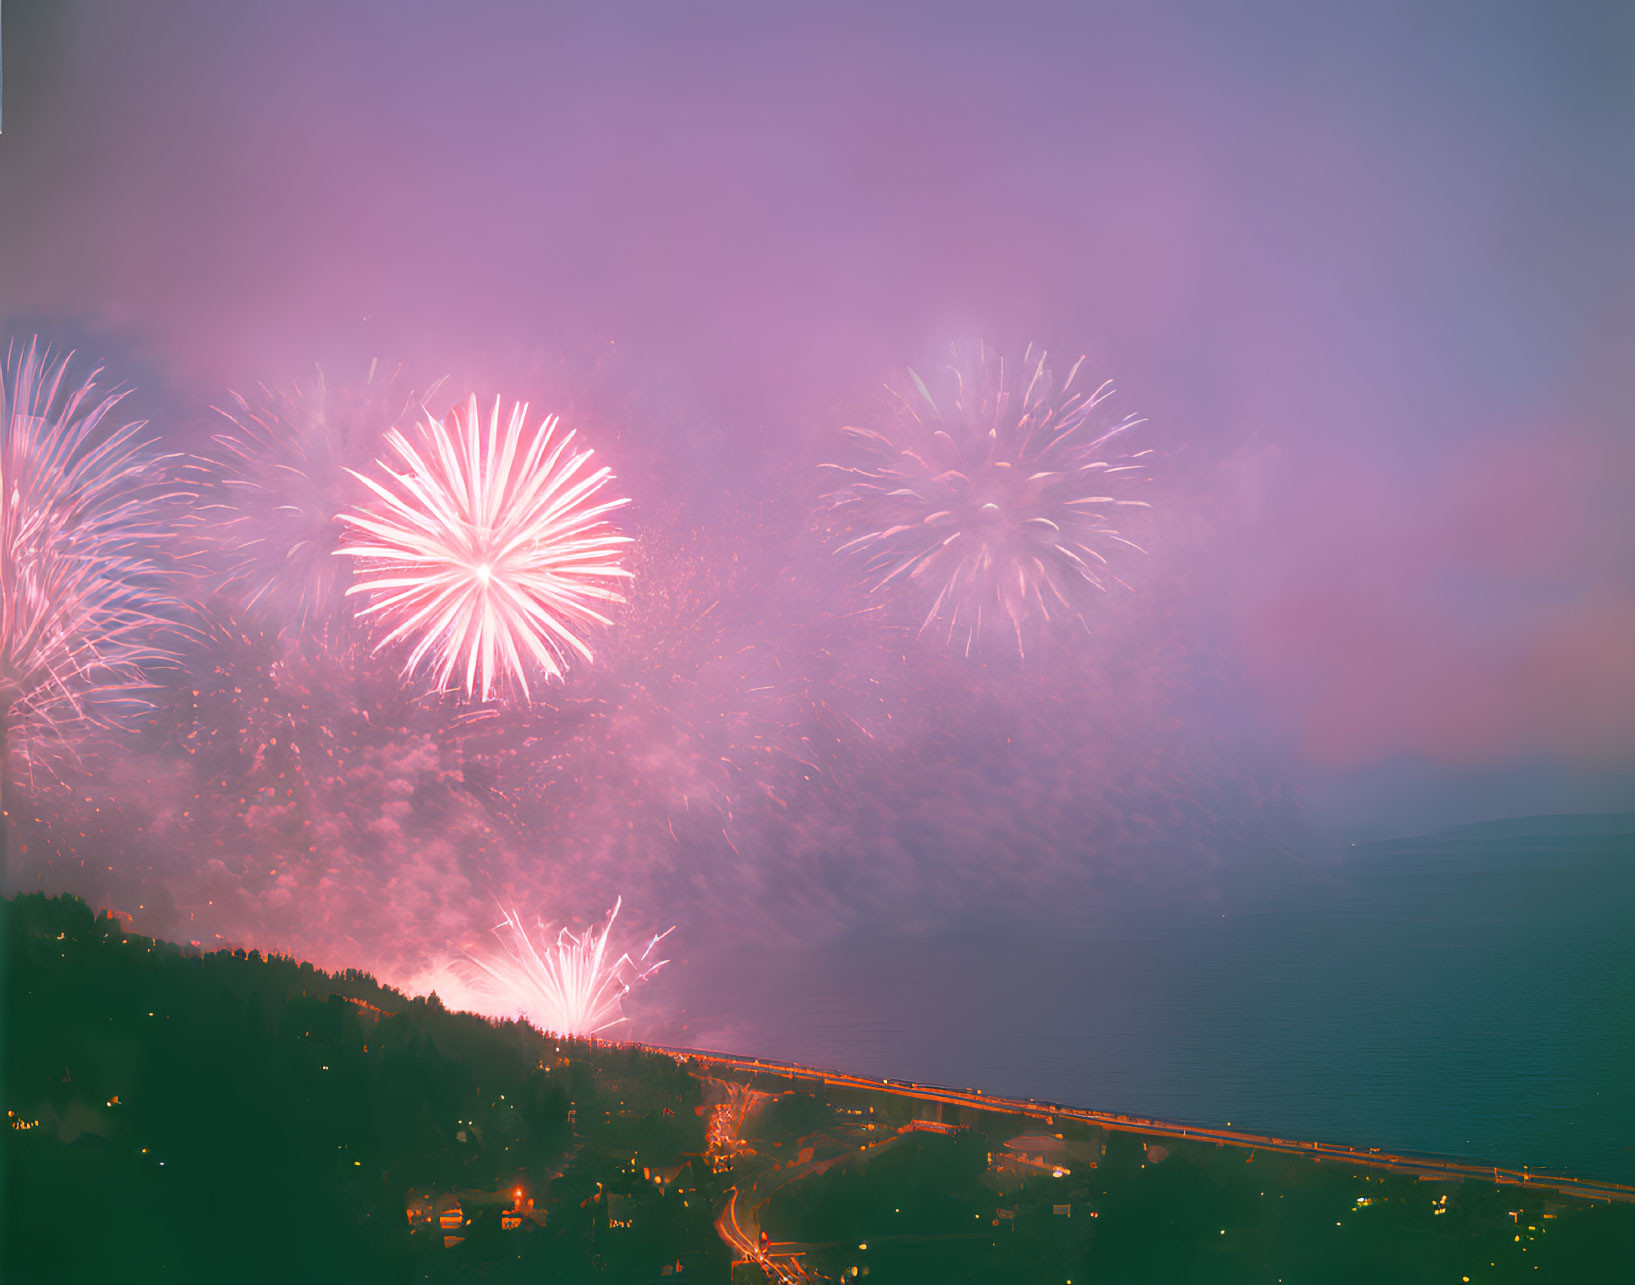 Colorful fireworks display over coastal road at dusk with ocean backdrop